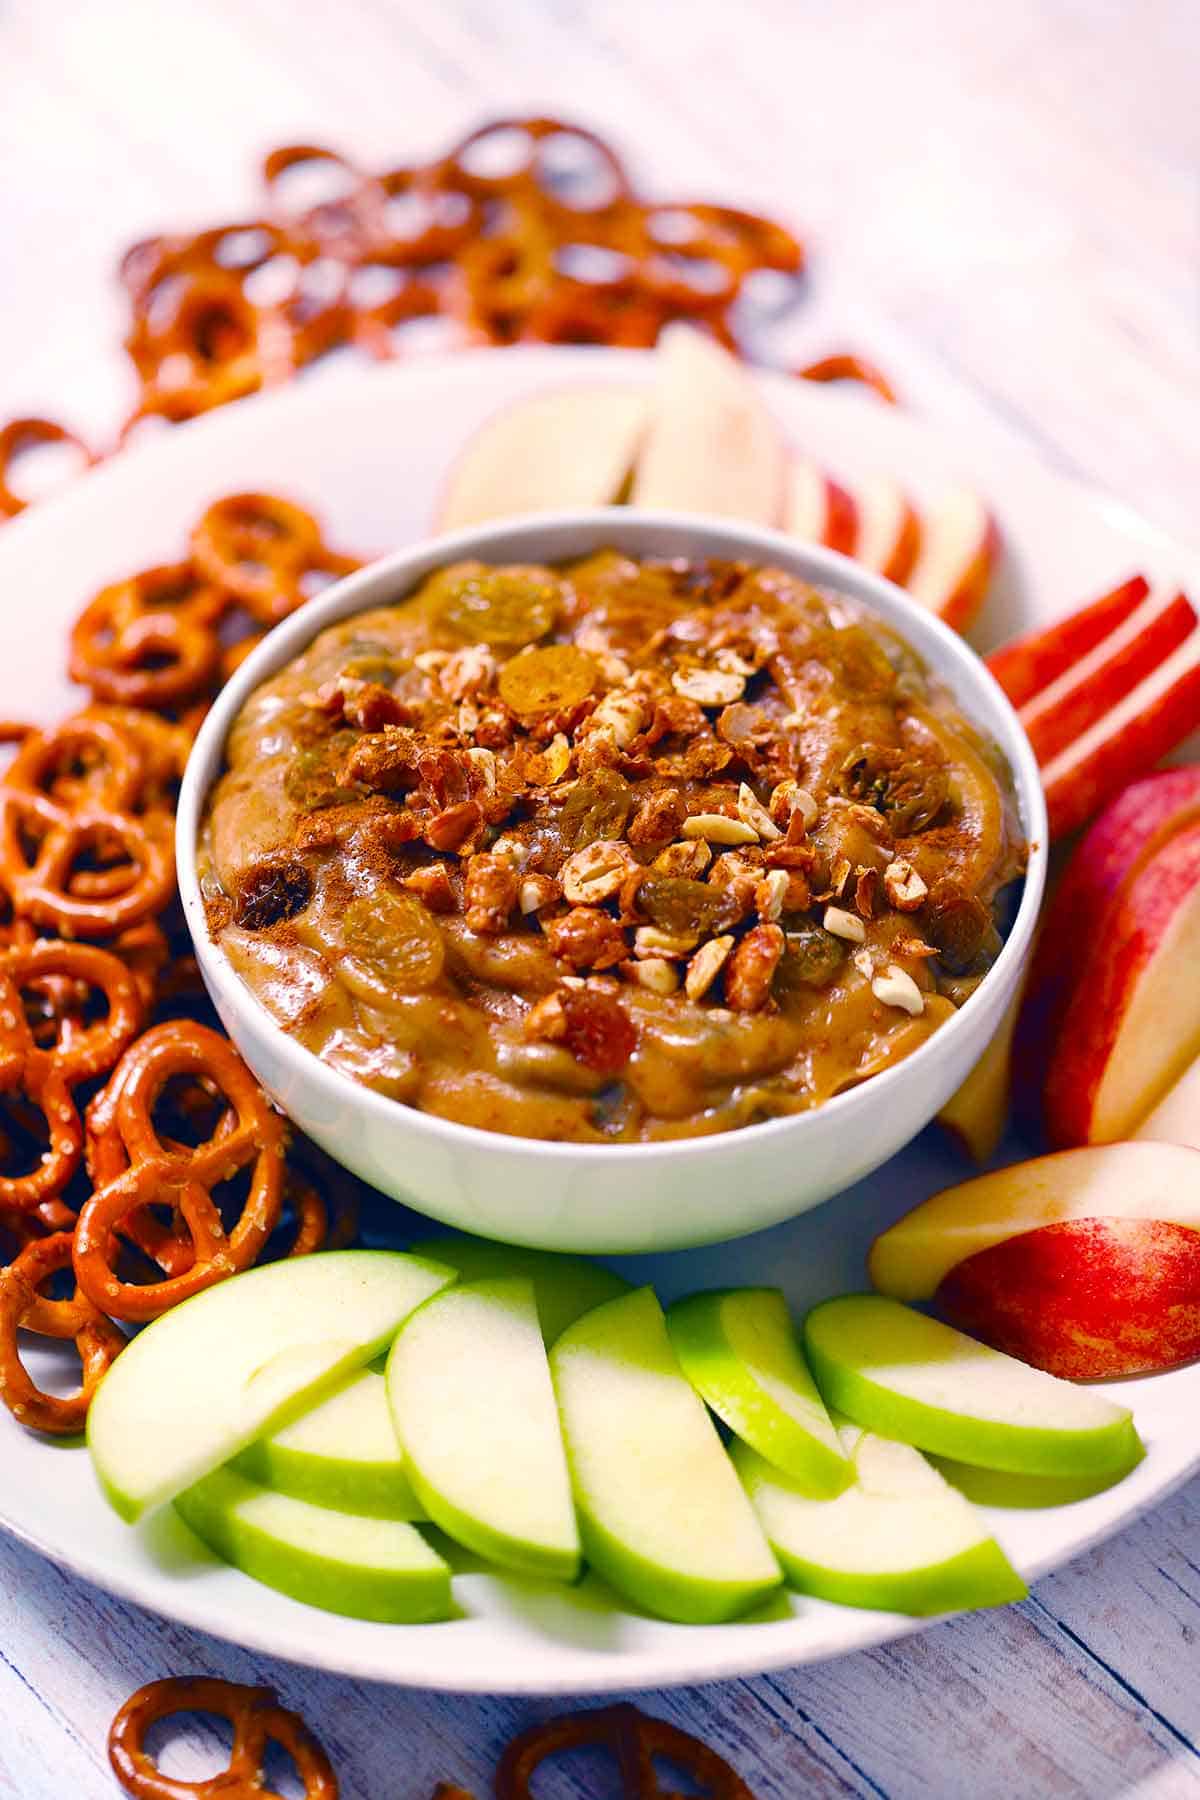 White bowl of peanut butter dip on a plate with apple slices and pretzels.